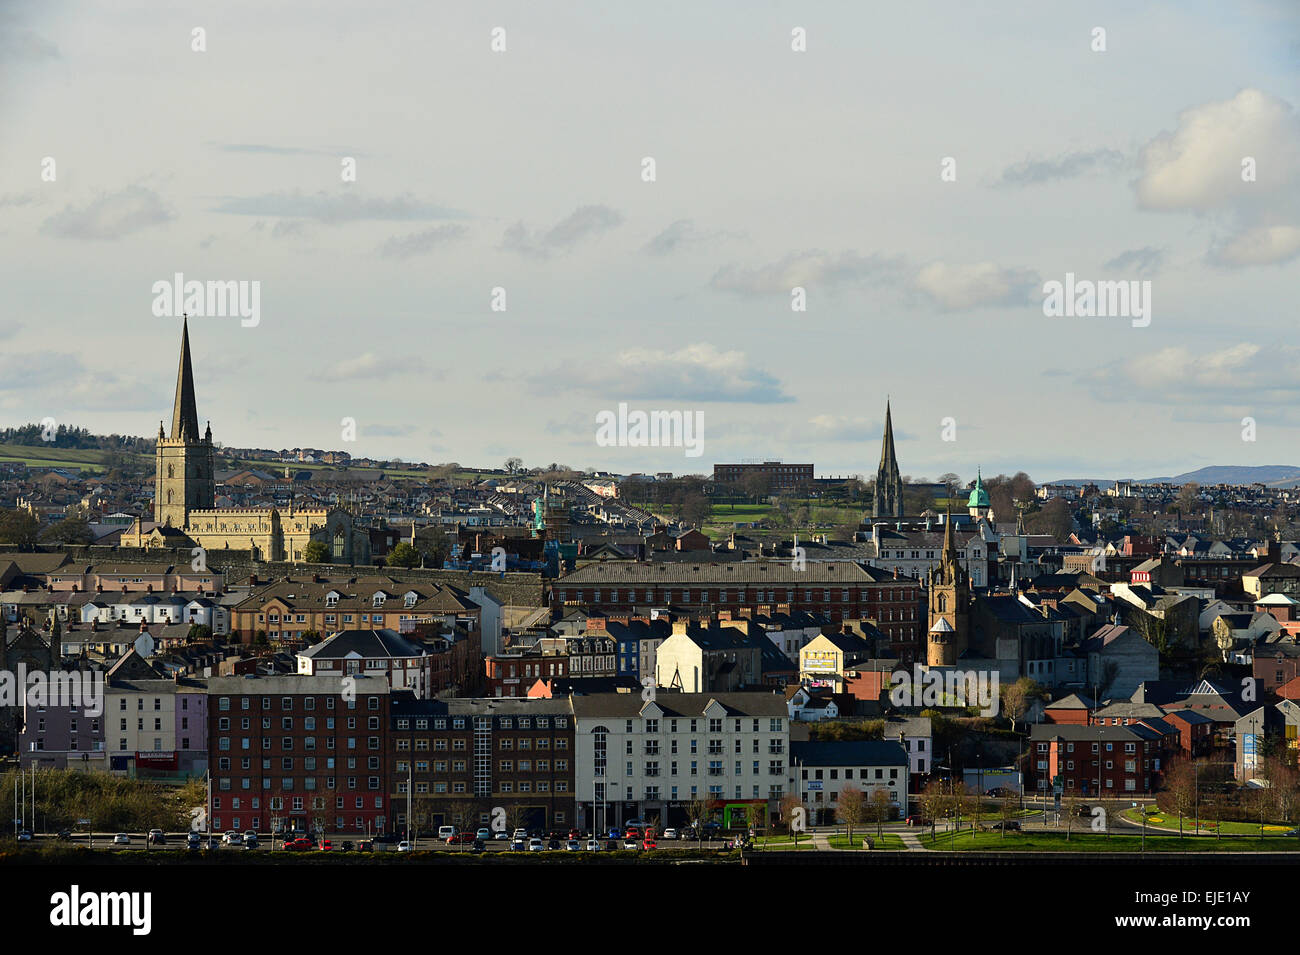 Londonderry, Derry, skyline, cattedrali e chiesa. Foto Stock